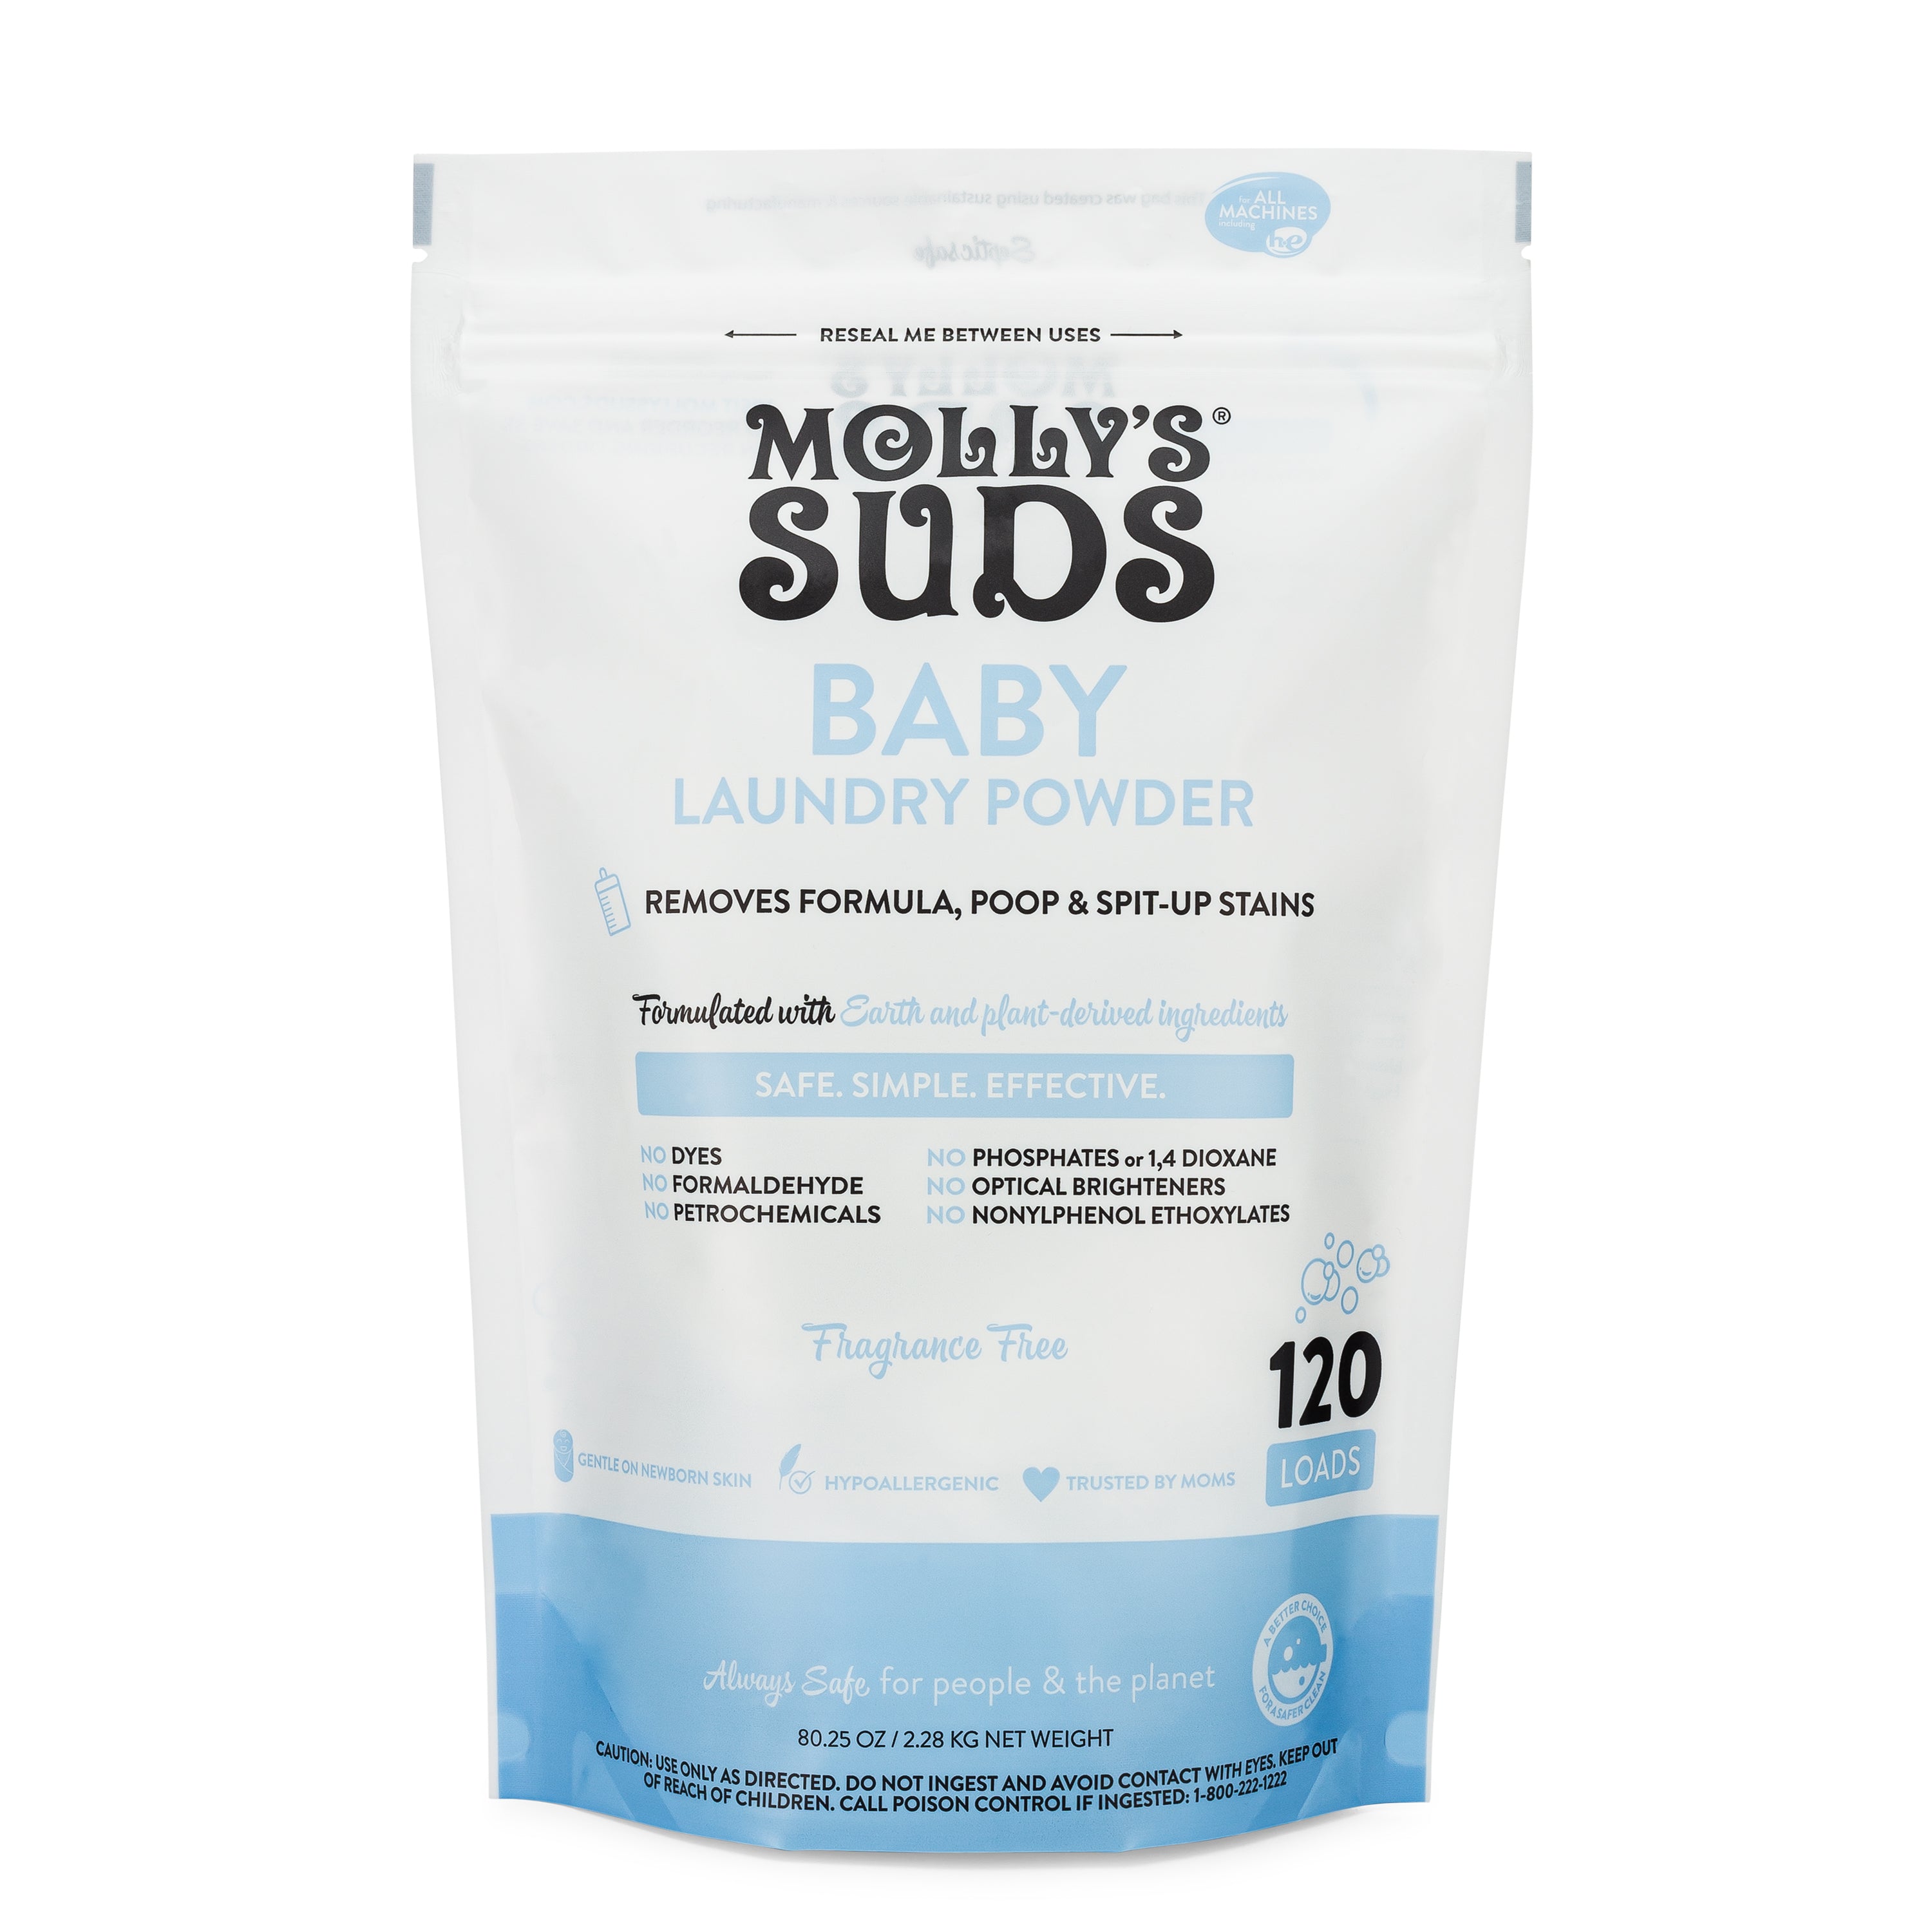 Molly's Suds